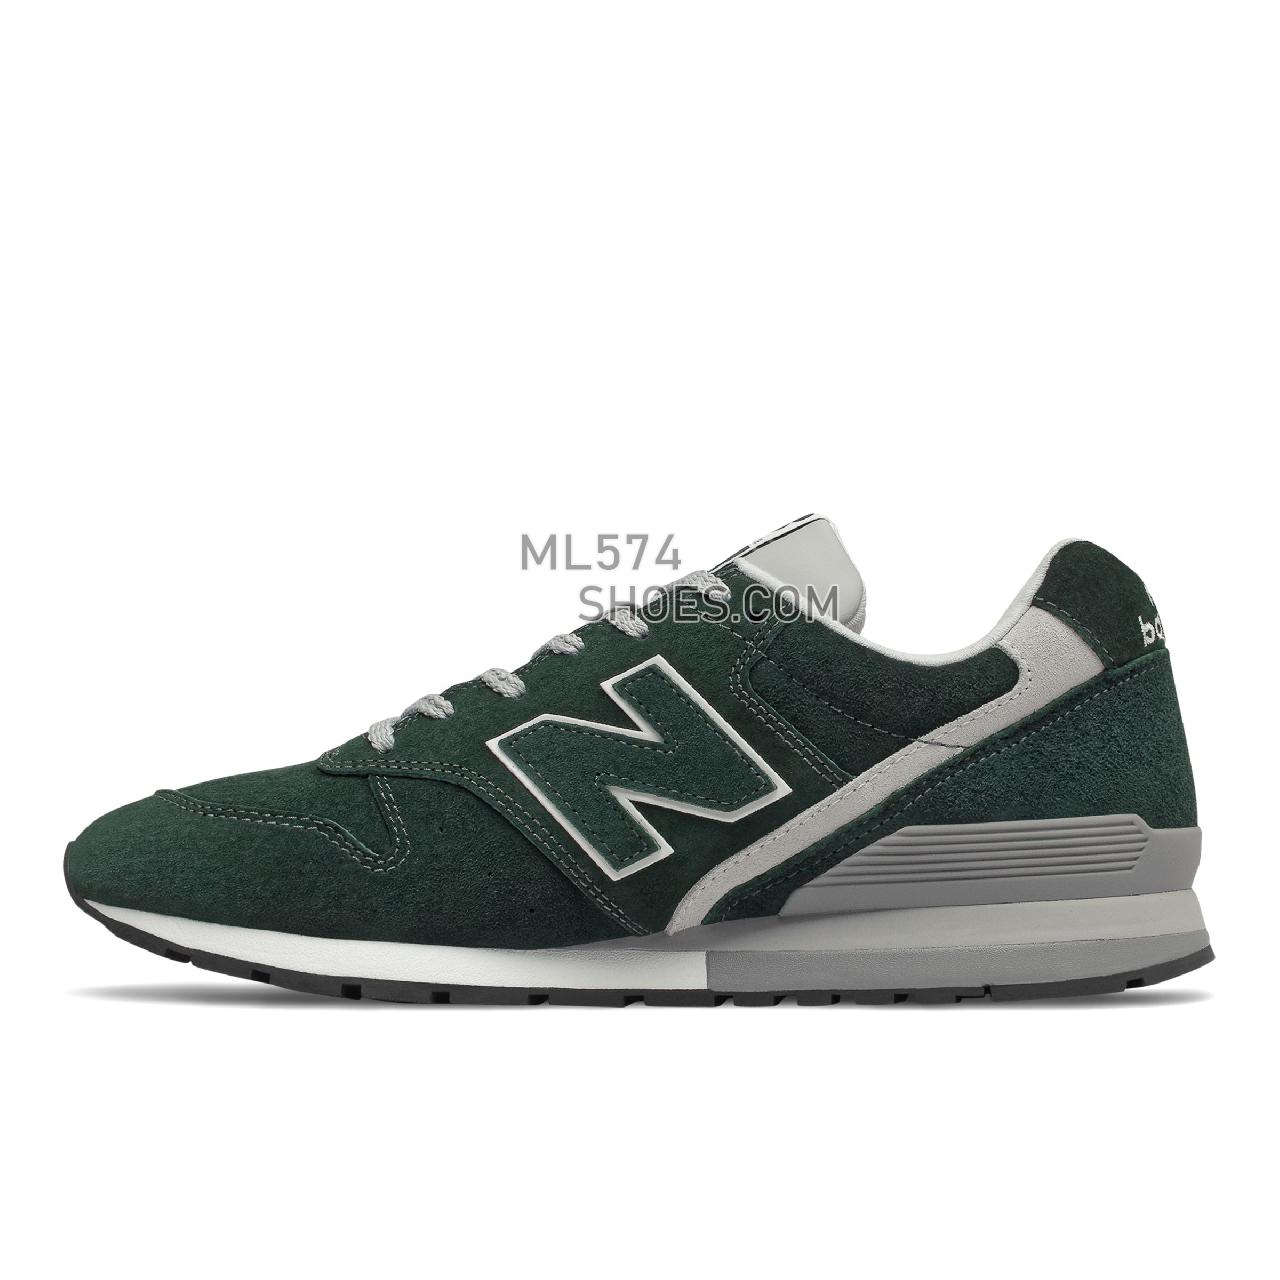 New Balance 996v2 - Men's Classic Sneakers - Black Emerald with Silver Mink - CM996WT2